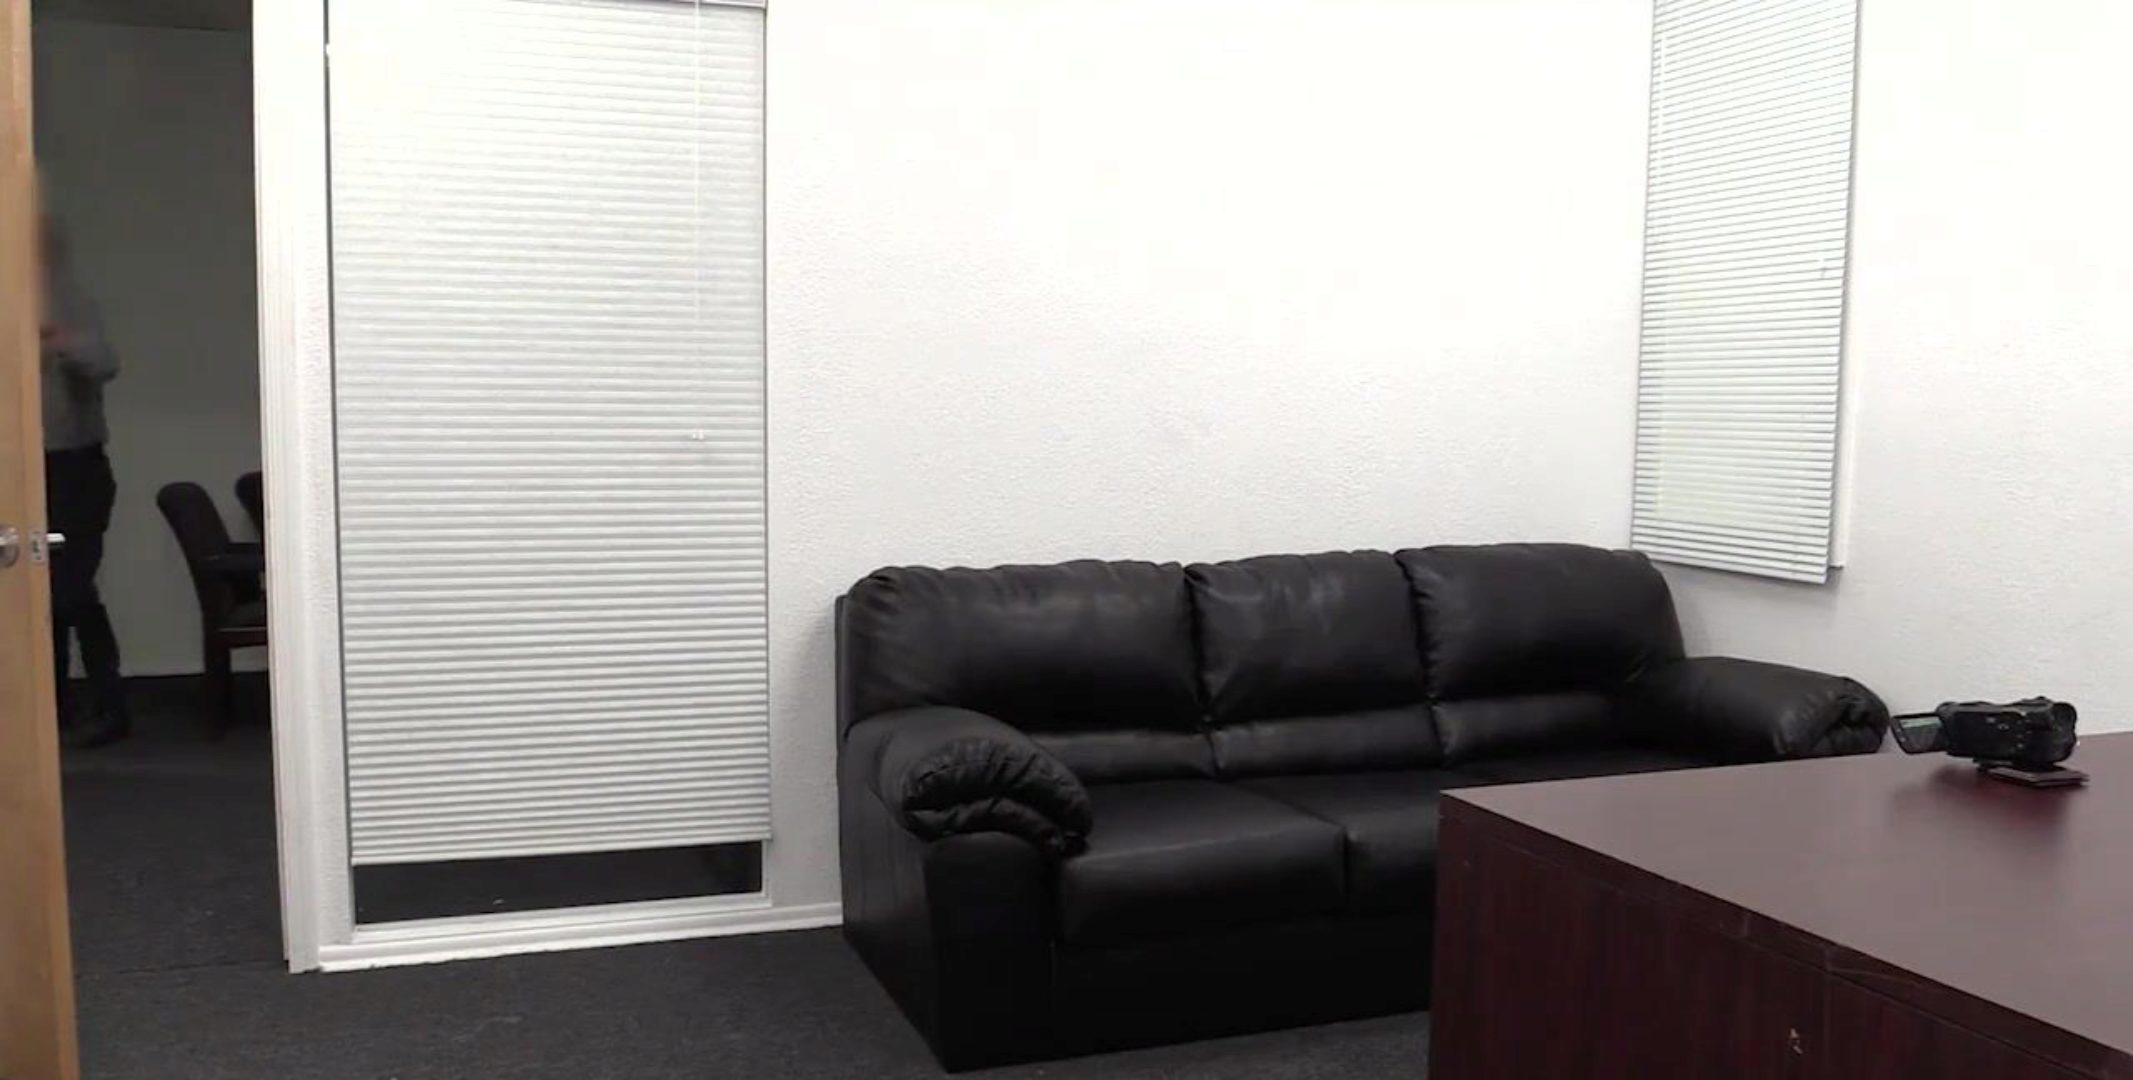 Backroom Casting Couch Images